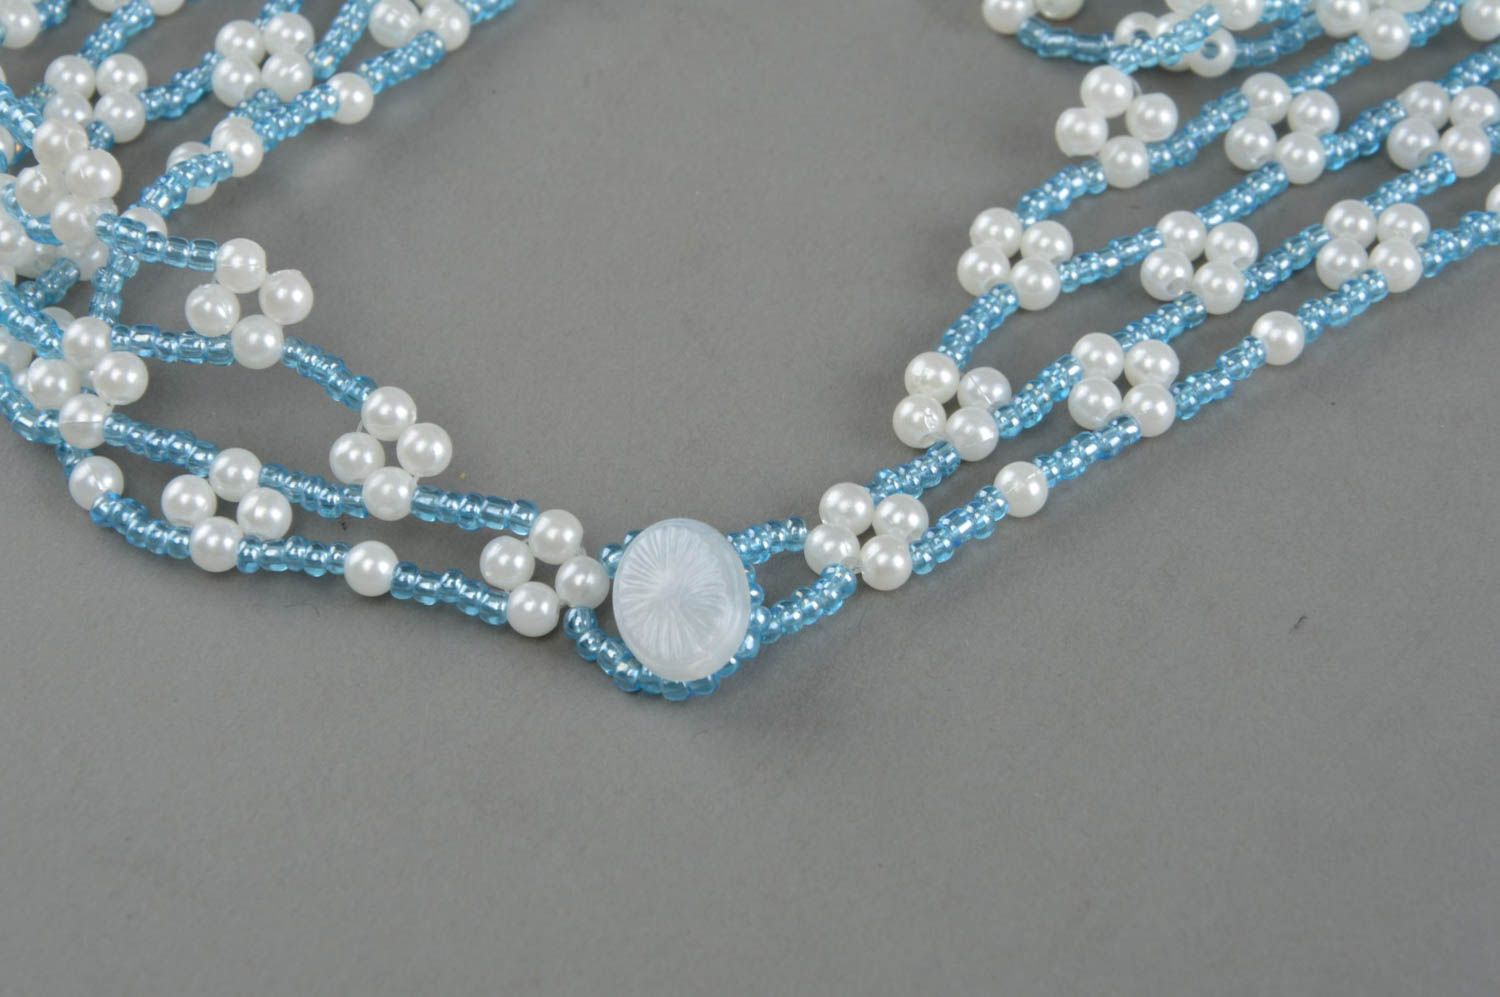 Beaded necklace handmade stylish accessory evening woven jewelry for girls photo 4